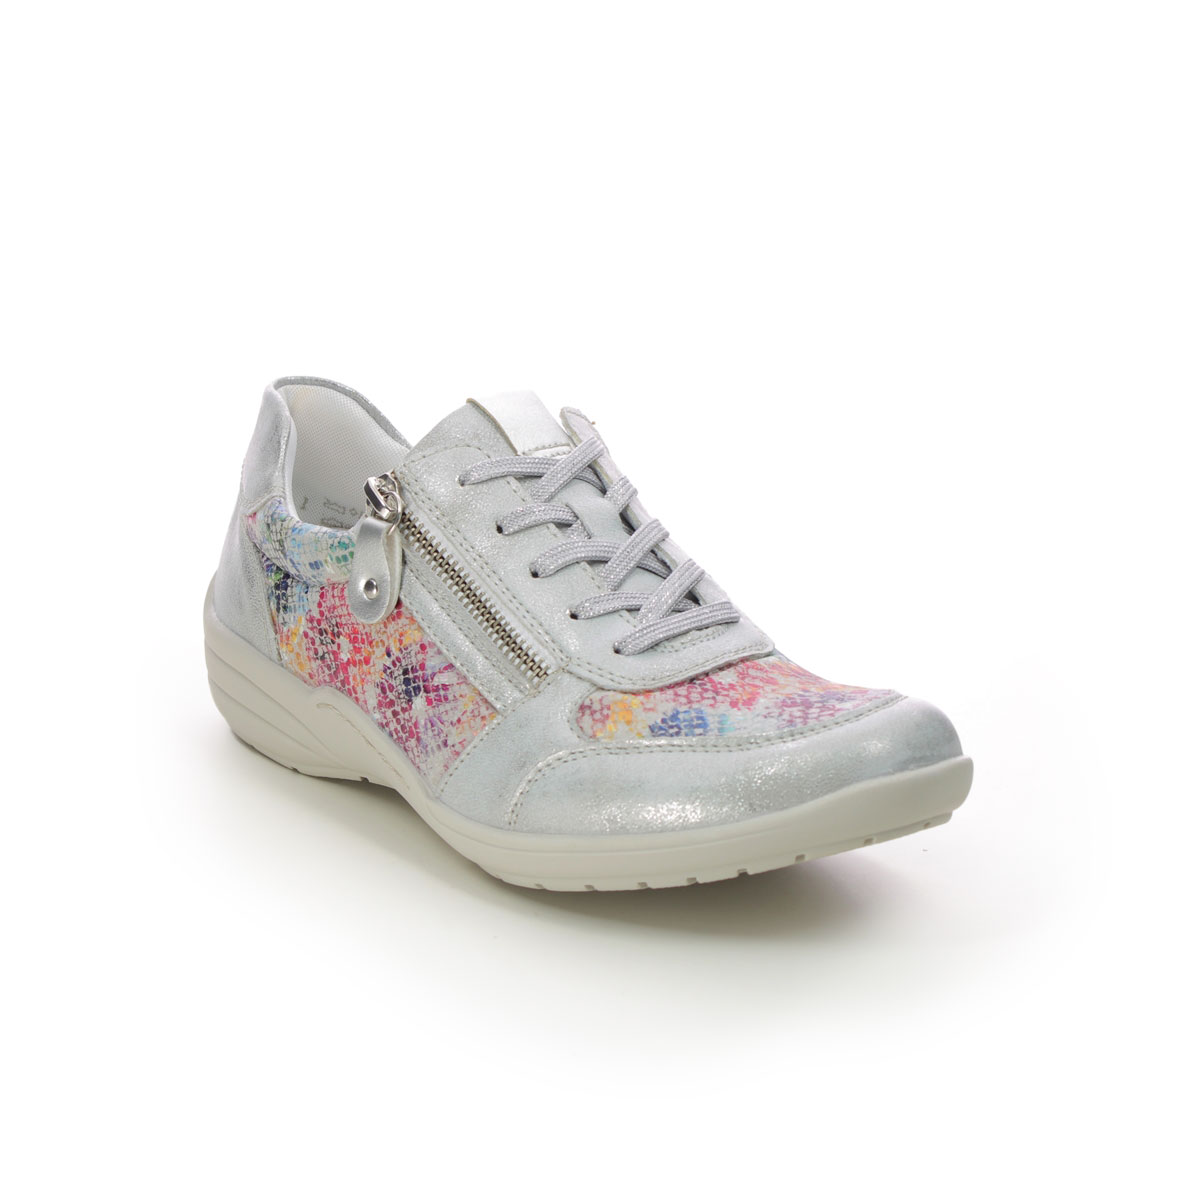 Remonte Bertazip Silver Floral Womens Lacing Shoes R7637-40 In Size 37 In Plain Silver Floral